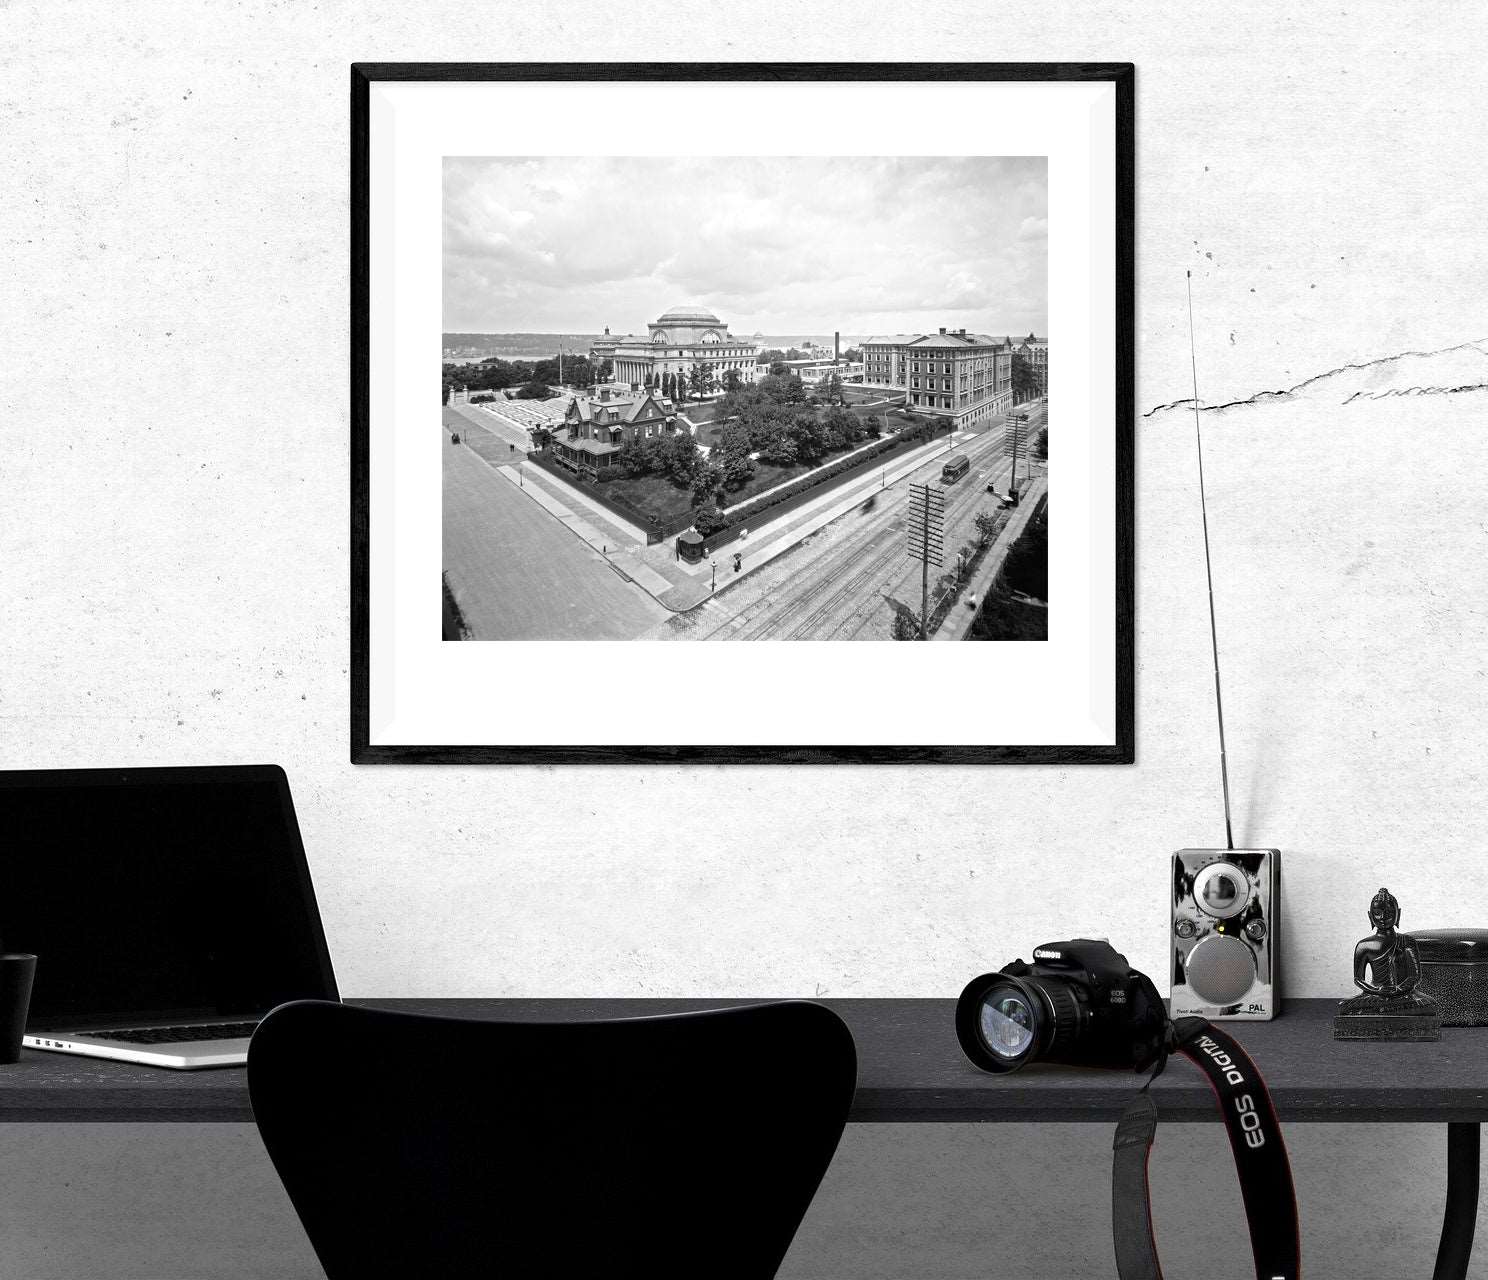 A framed paper print of a vintage photograph of Columbia University hanging above a desk